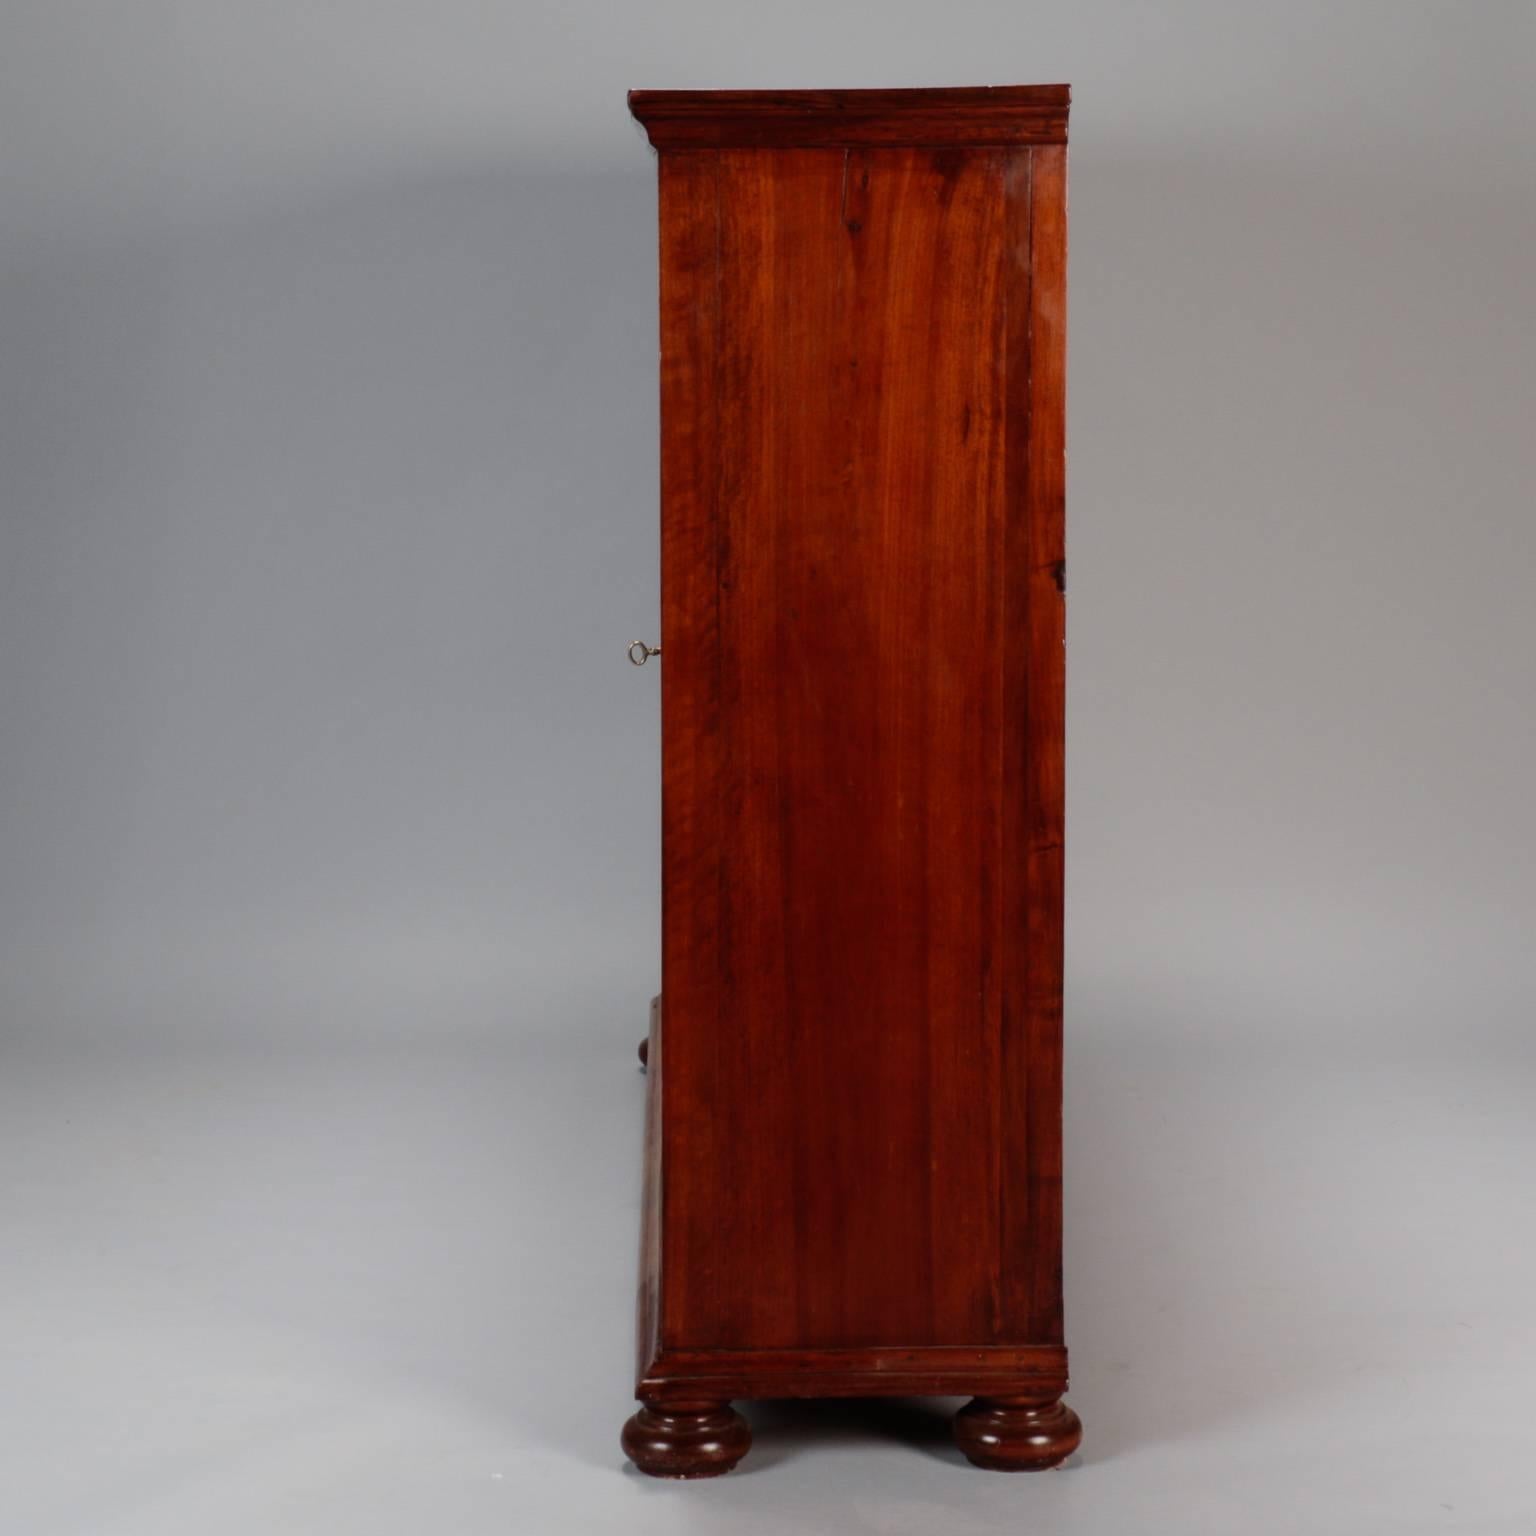 Carved 19th Century Italian Tall Walnut Two-Door Shallow Wall Cabinet